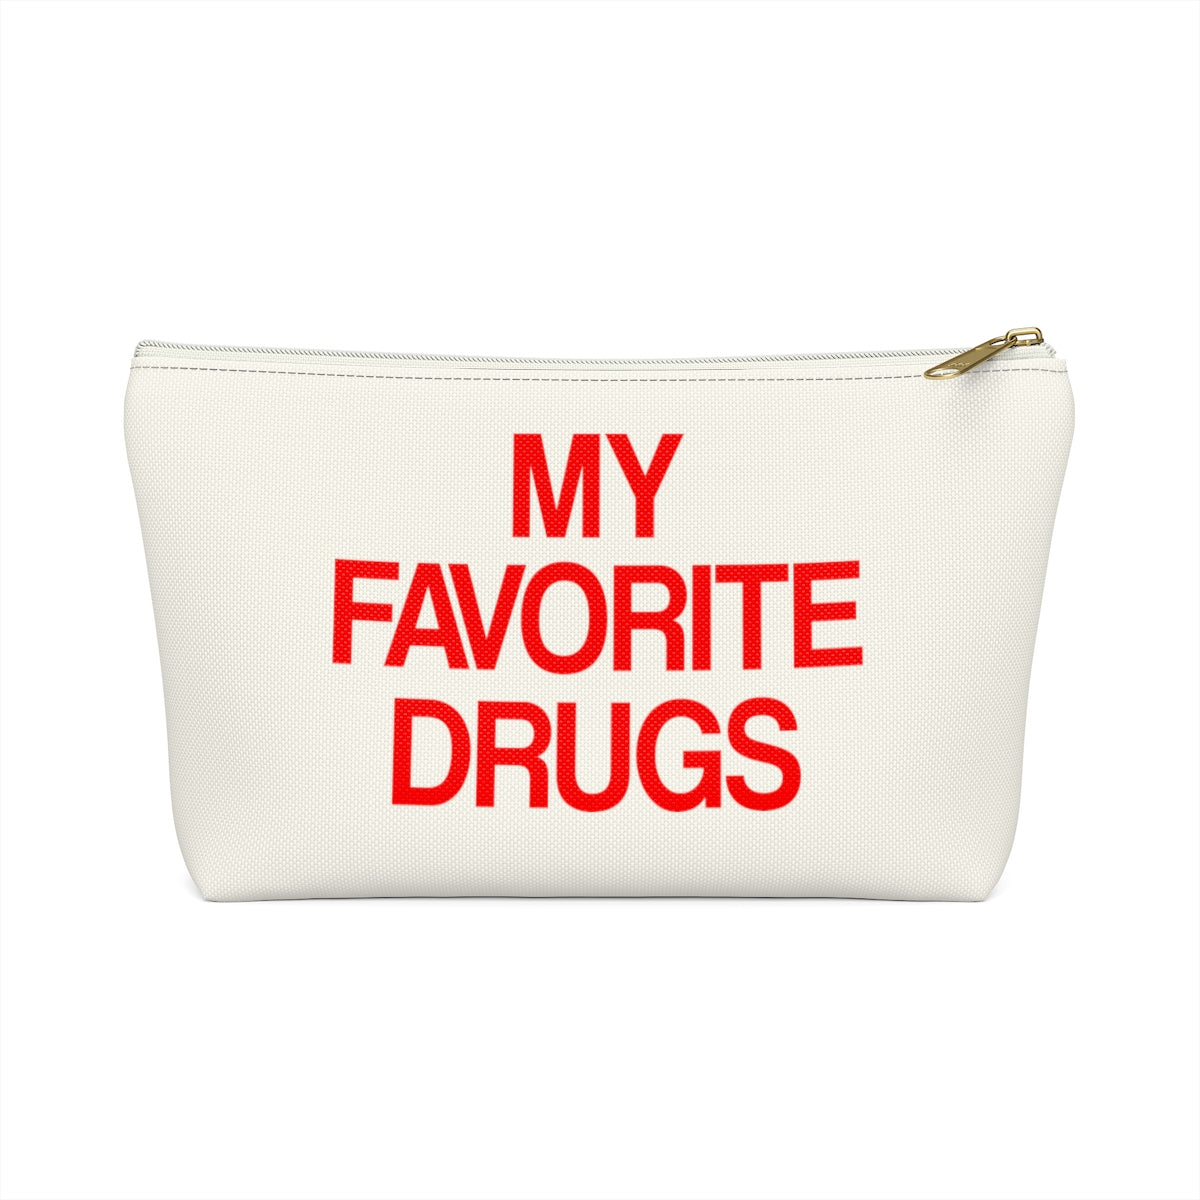 My Favorite Drugs Bag Pouch, Funny Fun Medicinal Medical Medicine Medication Bag Pills Makeup Festival Accessory Pouch w T-bottom Starcove Fashion